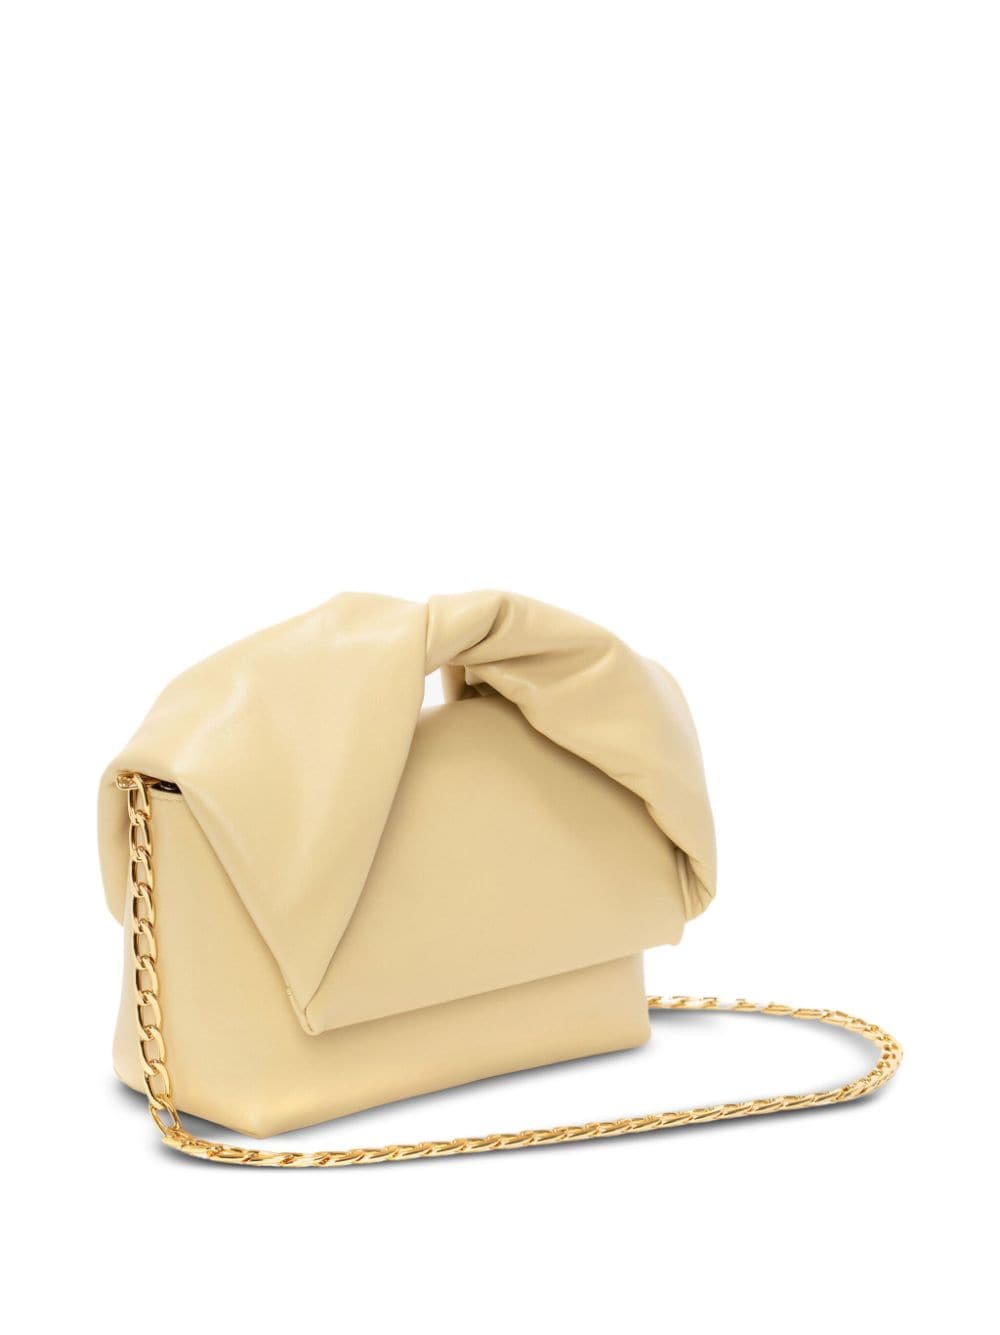 Luxurious Twisted Butter Handbag for Women in FW23